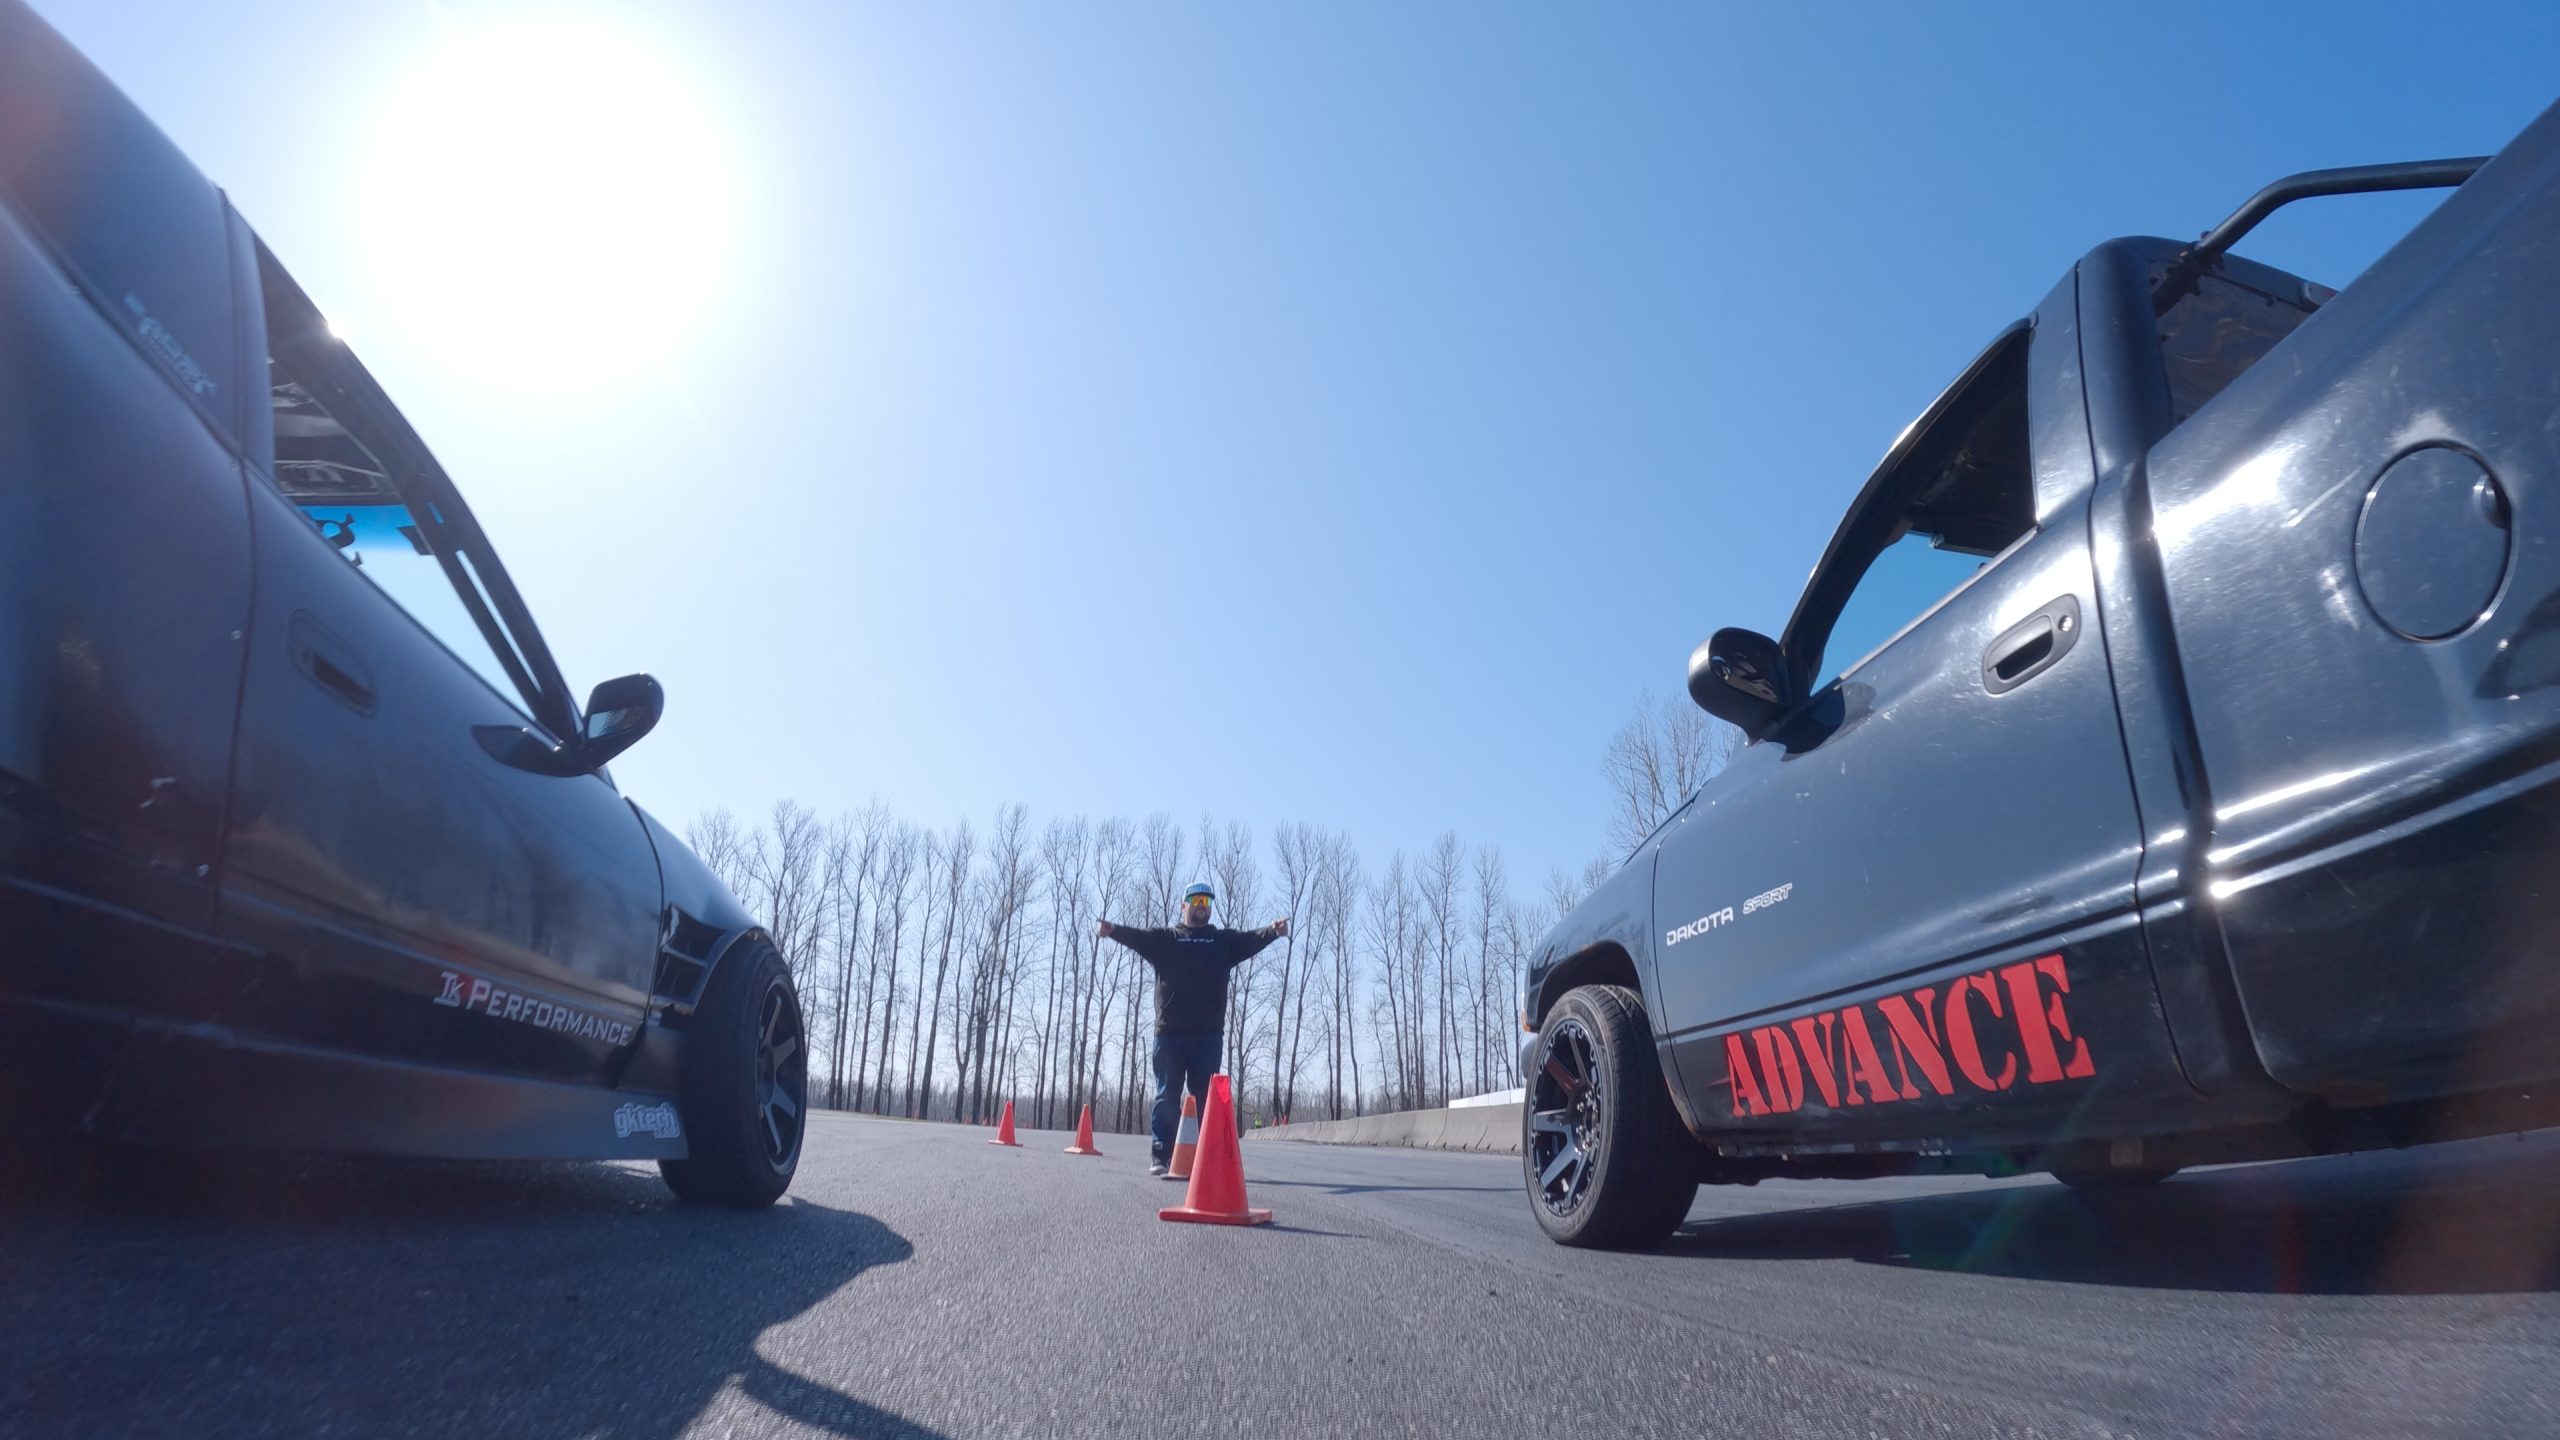 Drifting cars and FPV Drones